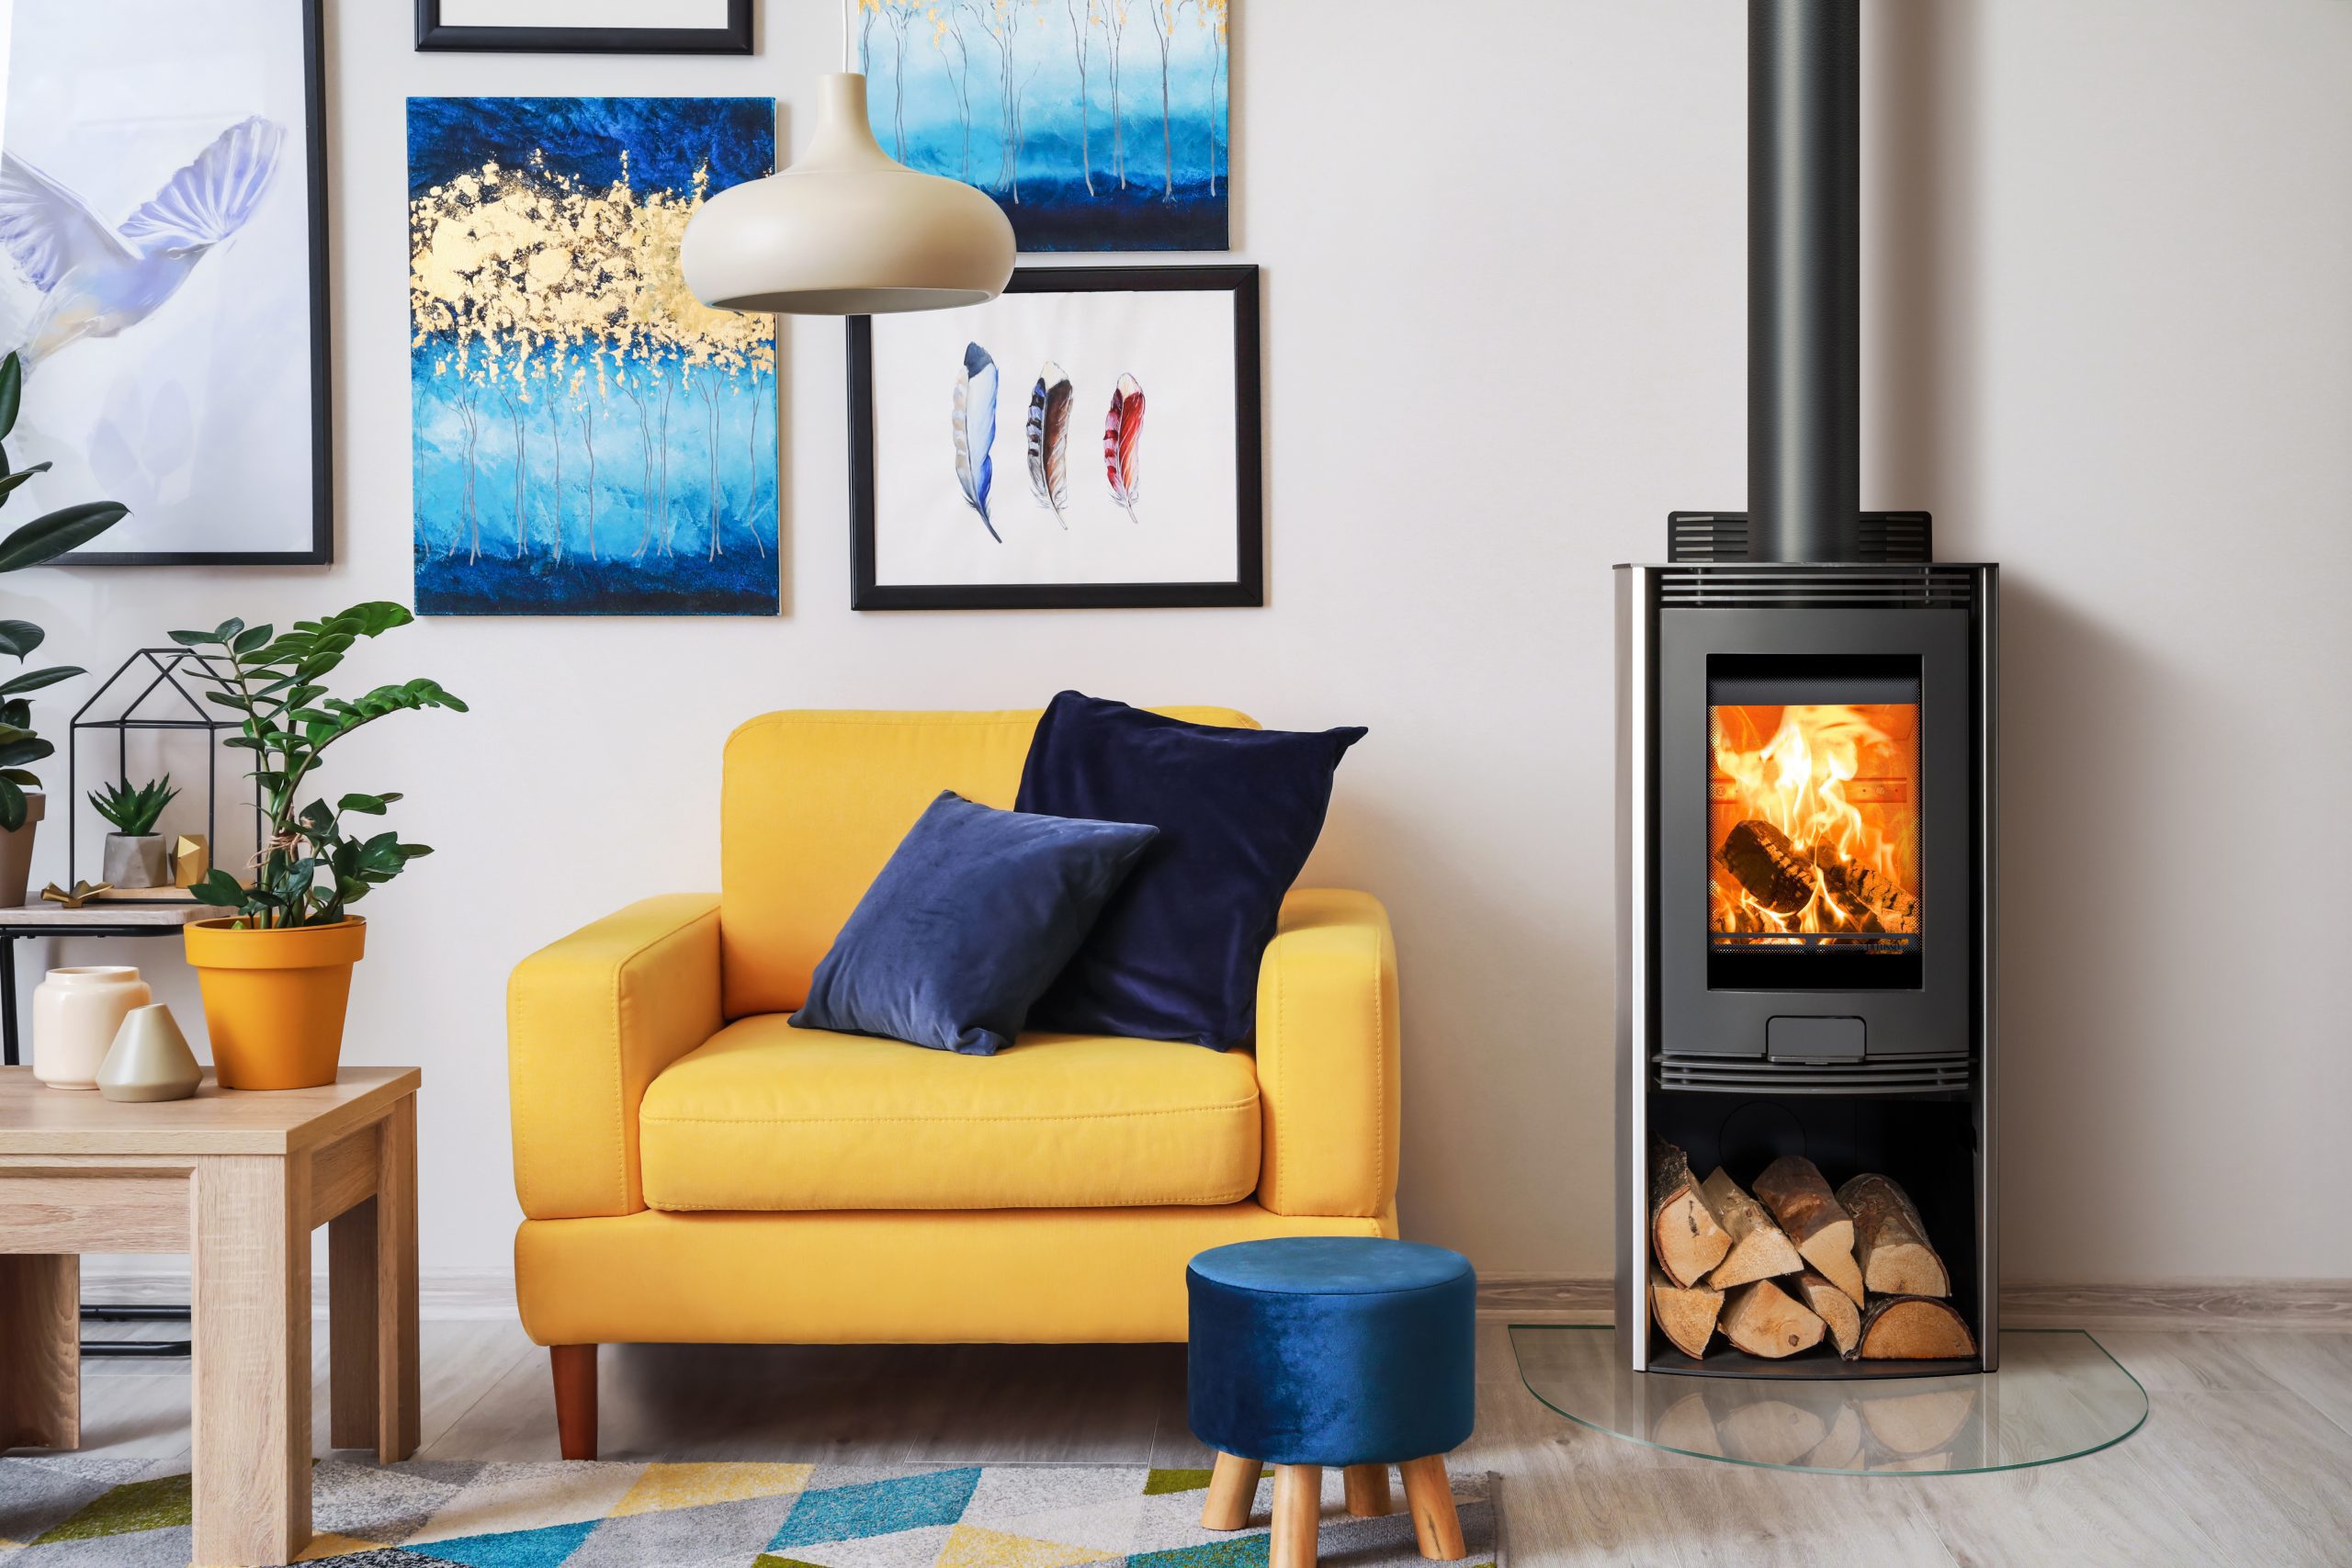 regulations and requirements for installing a log burner in the UK